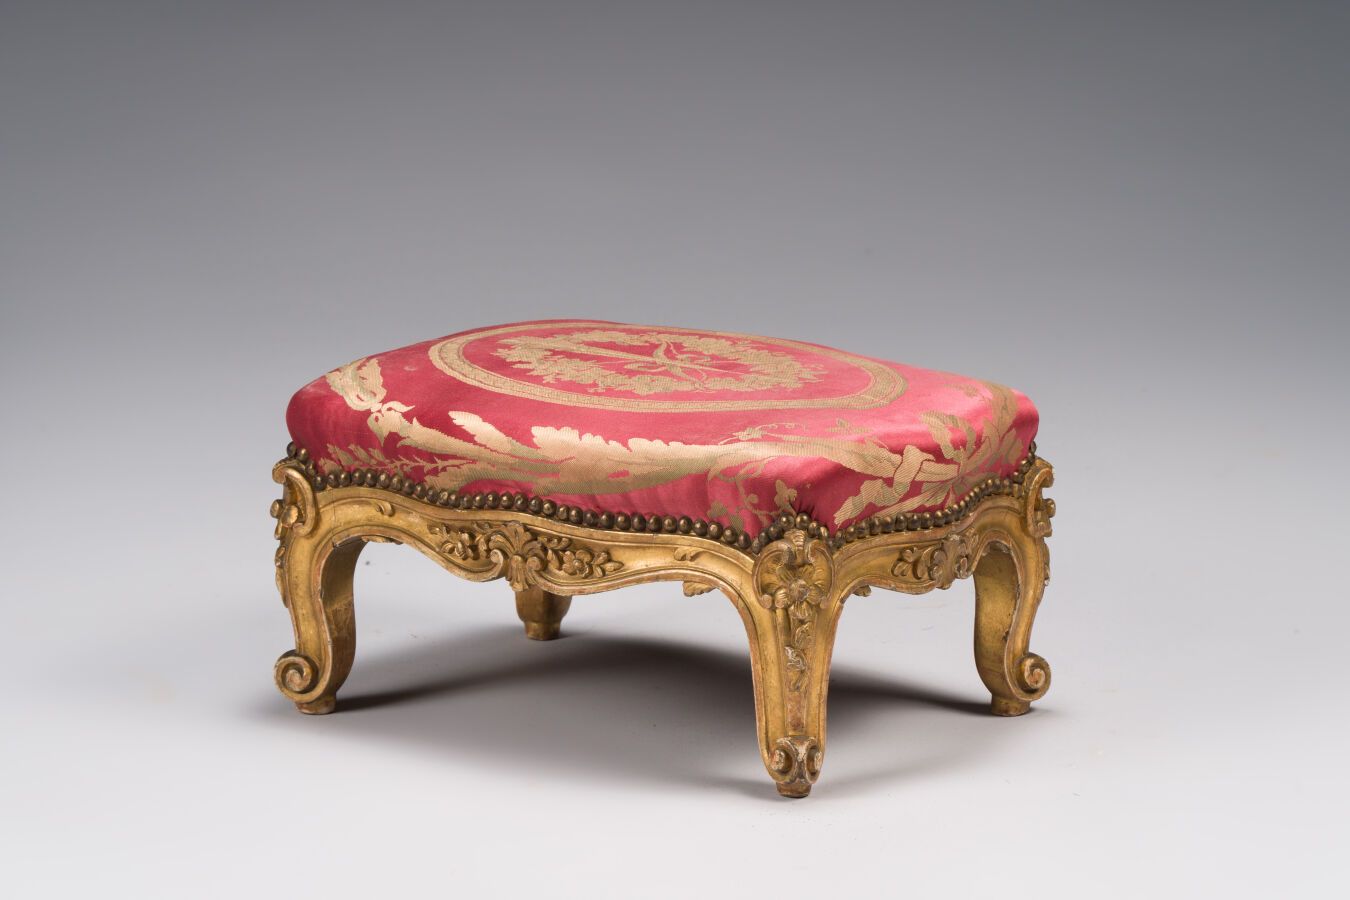 Null 155. Rectangular foot stool in carved and gilded wood with
decoration of fl&hellip;